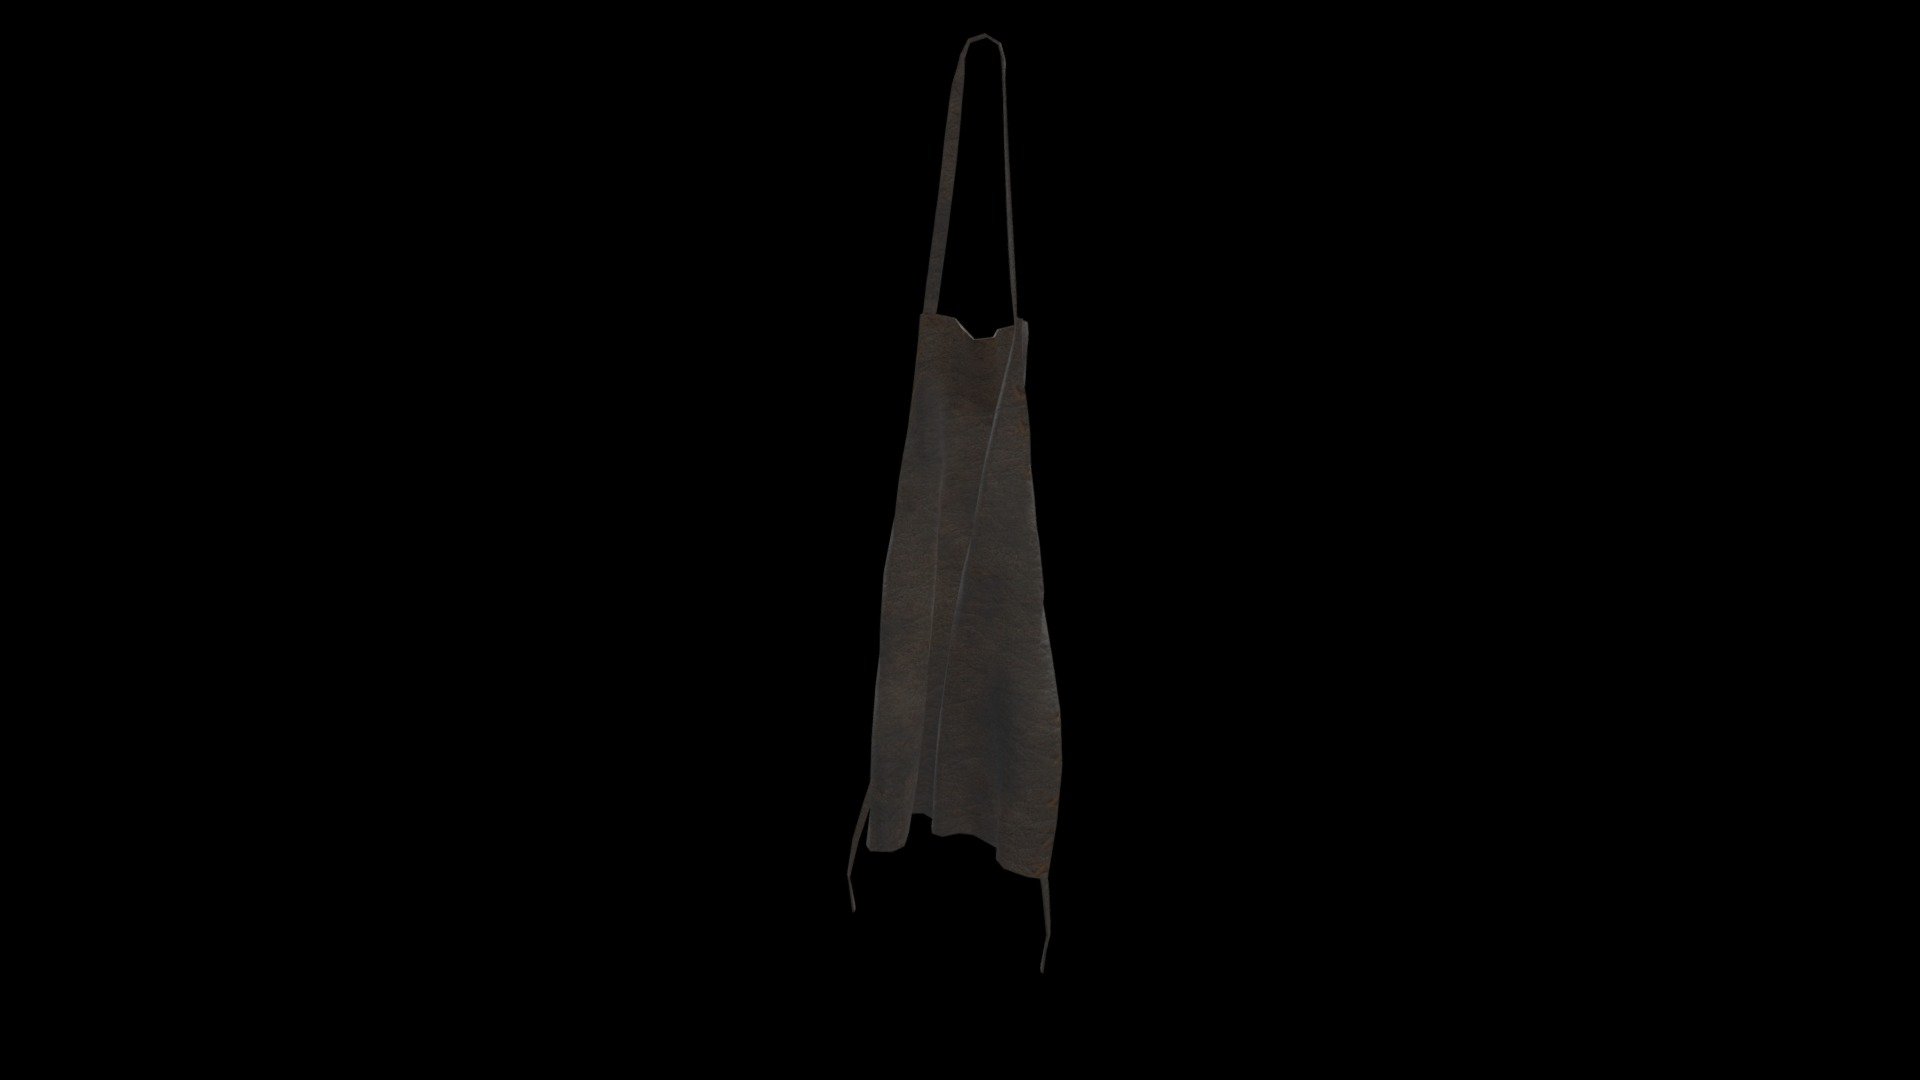 This is a Apron I made as part of my final blacksmith environmental scene in my 3D Modeling course. I got to experiment with NCloth with this model! In the scene this apron is hanging on a wall hook.

Modeled in Maya - Texture in Substance Painter - Apron - 3D model by sdallas 3d model